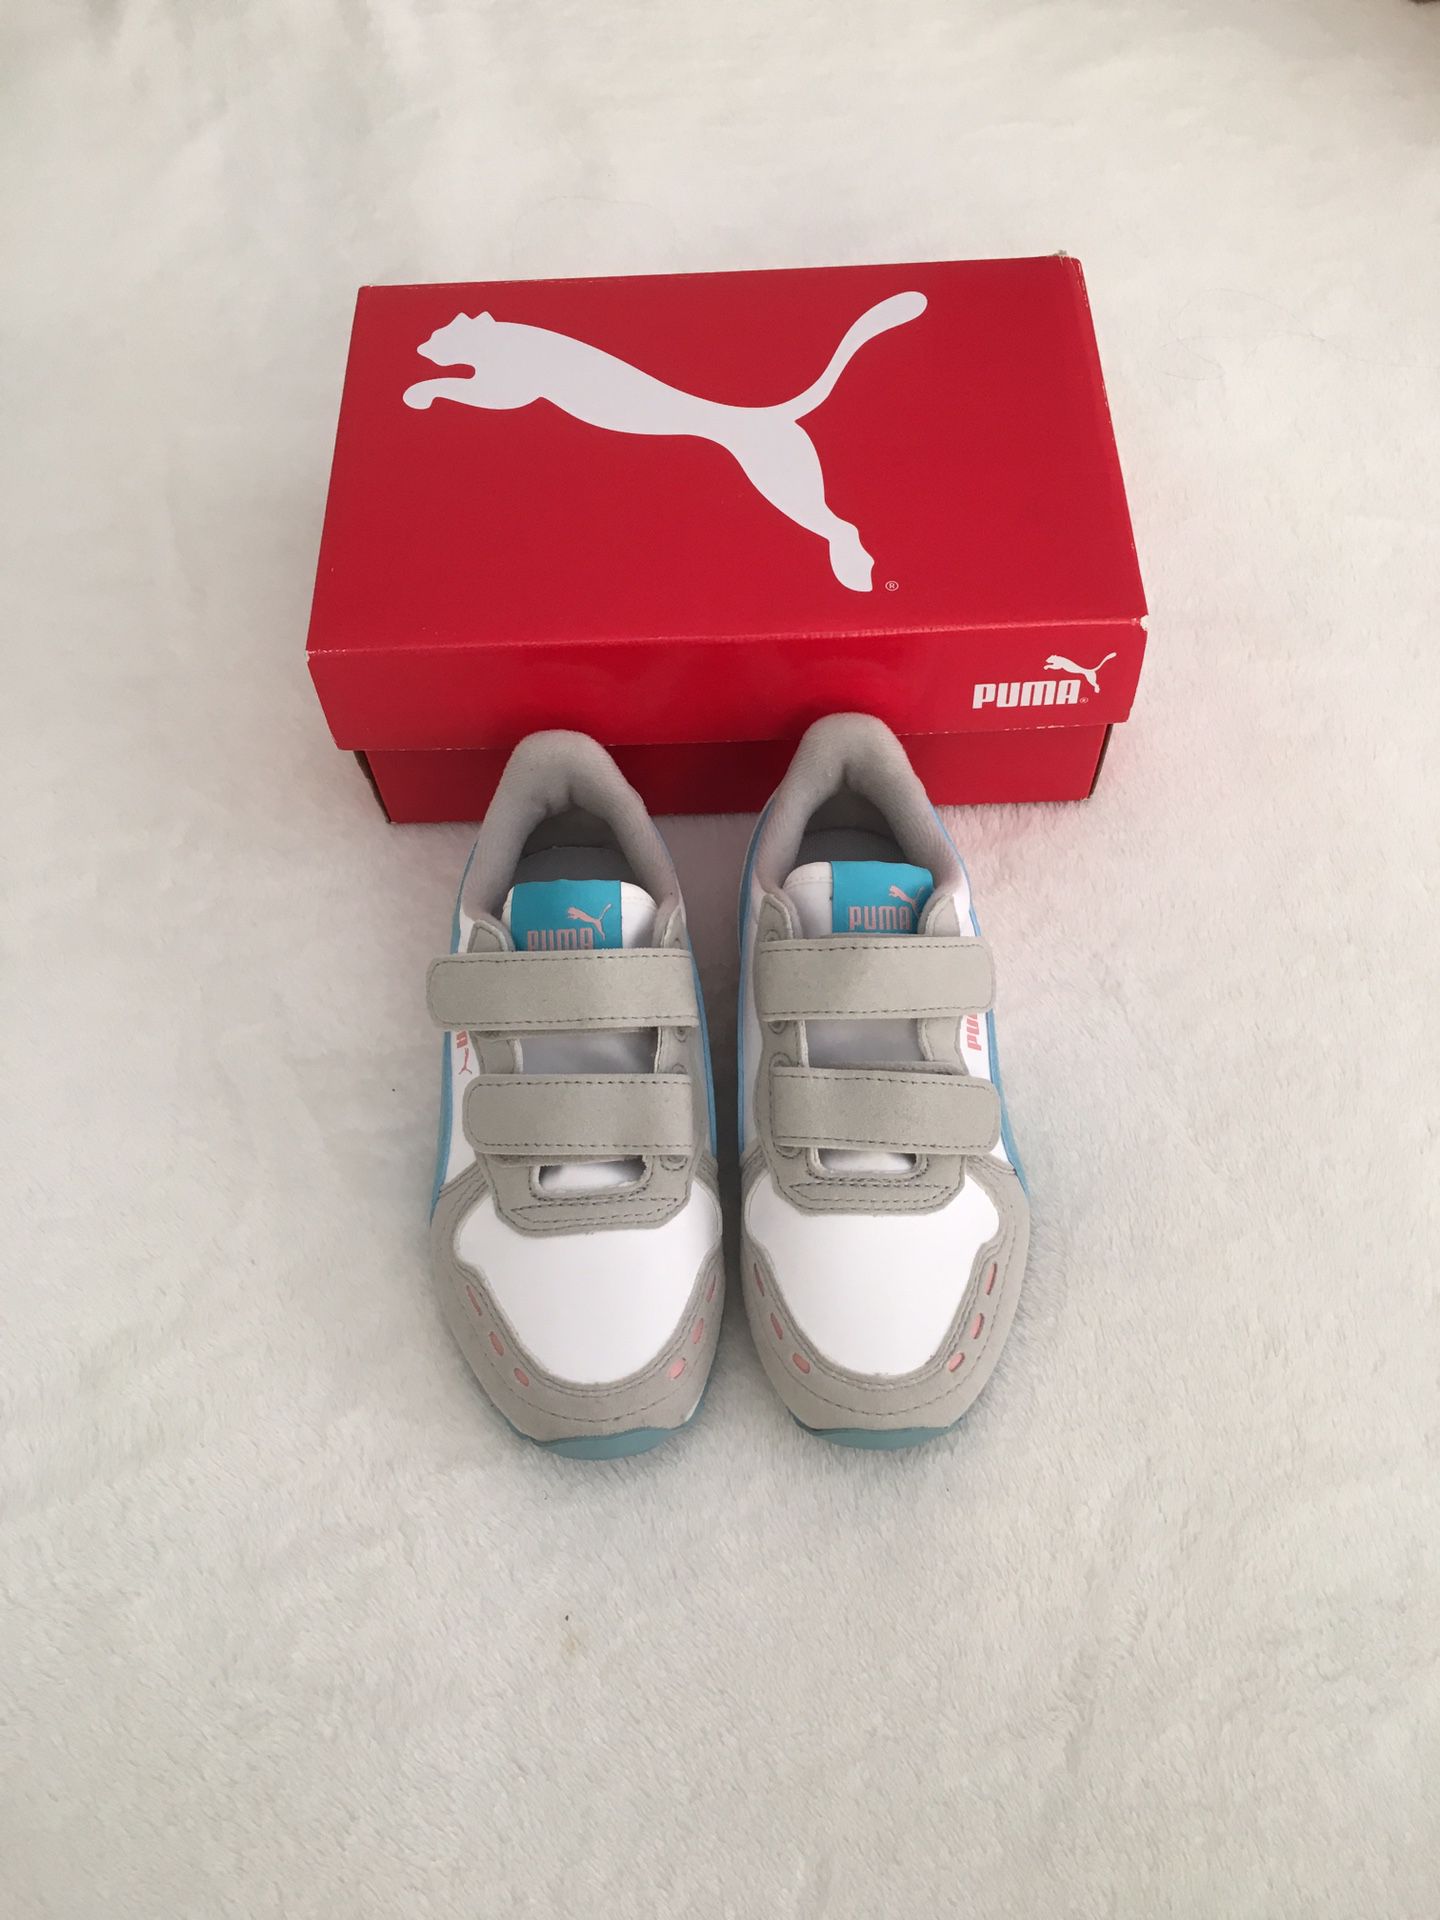 Girl puma sneakers in size 10.5C. New with box